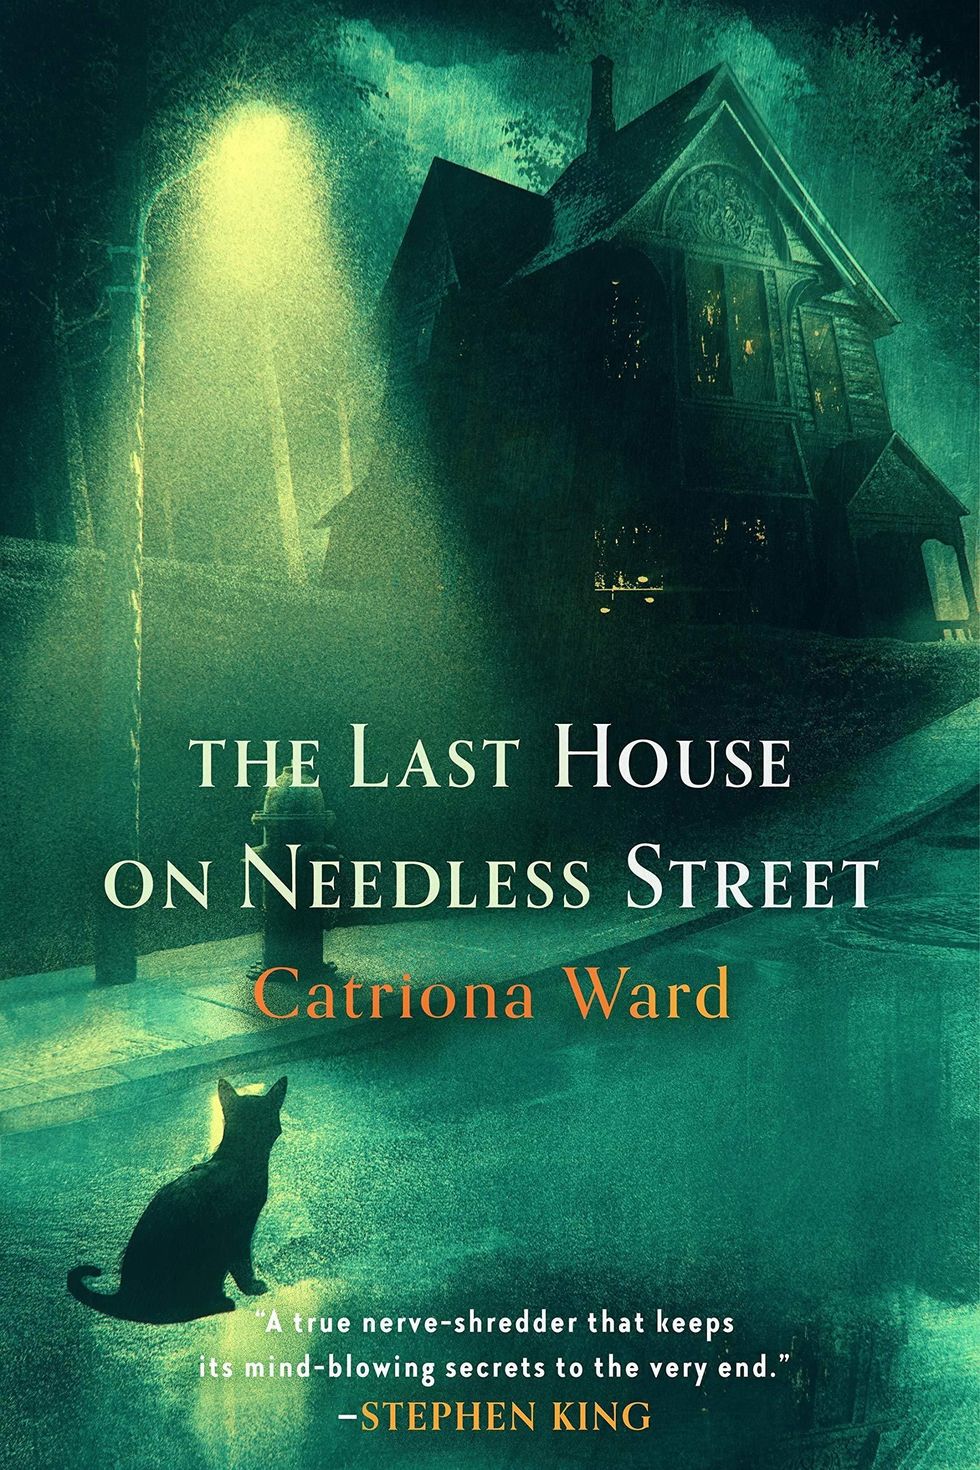 "The Last House on Needless Street" by Catriona Ward